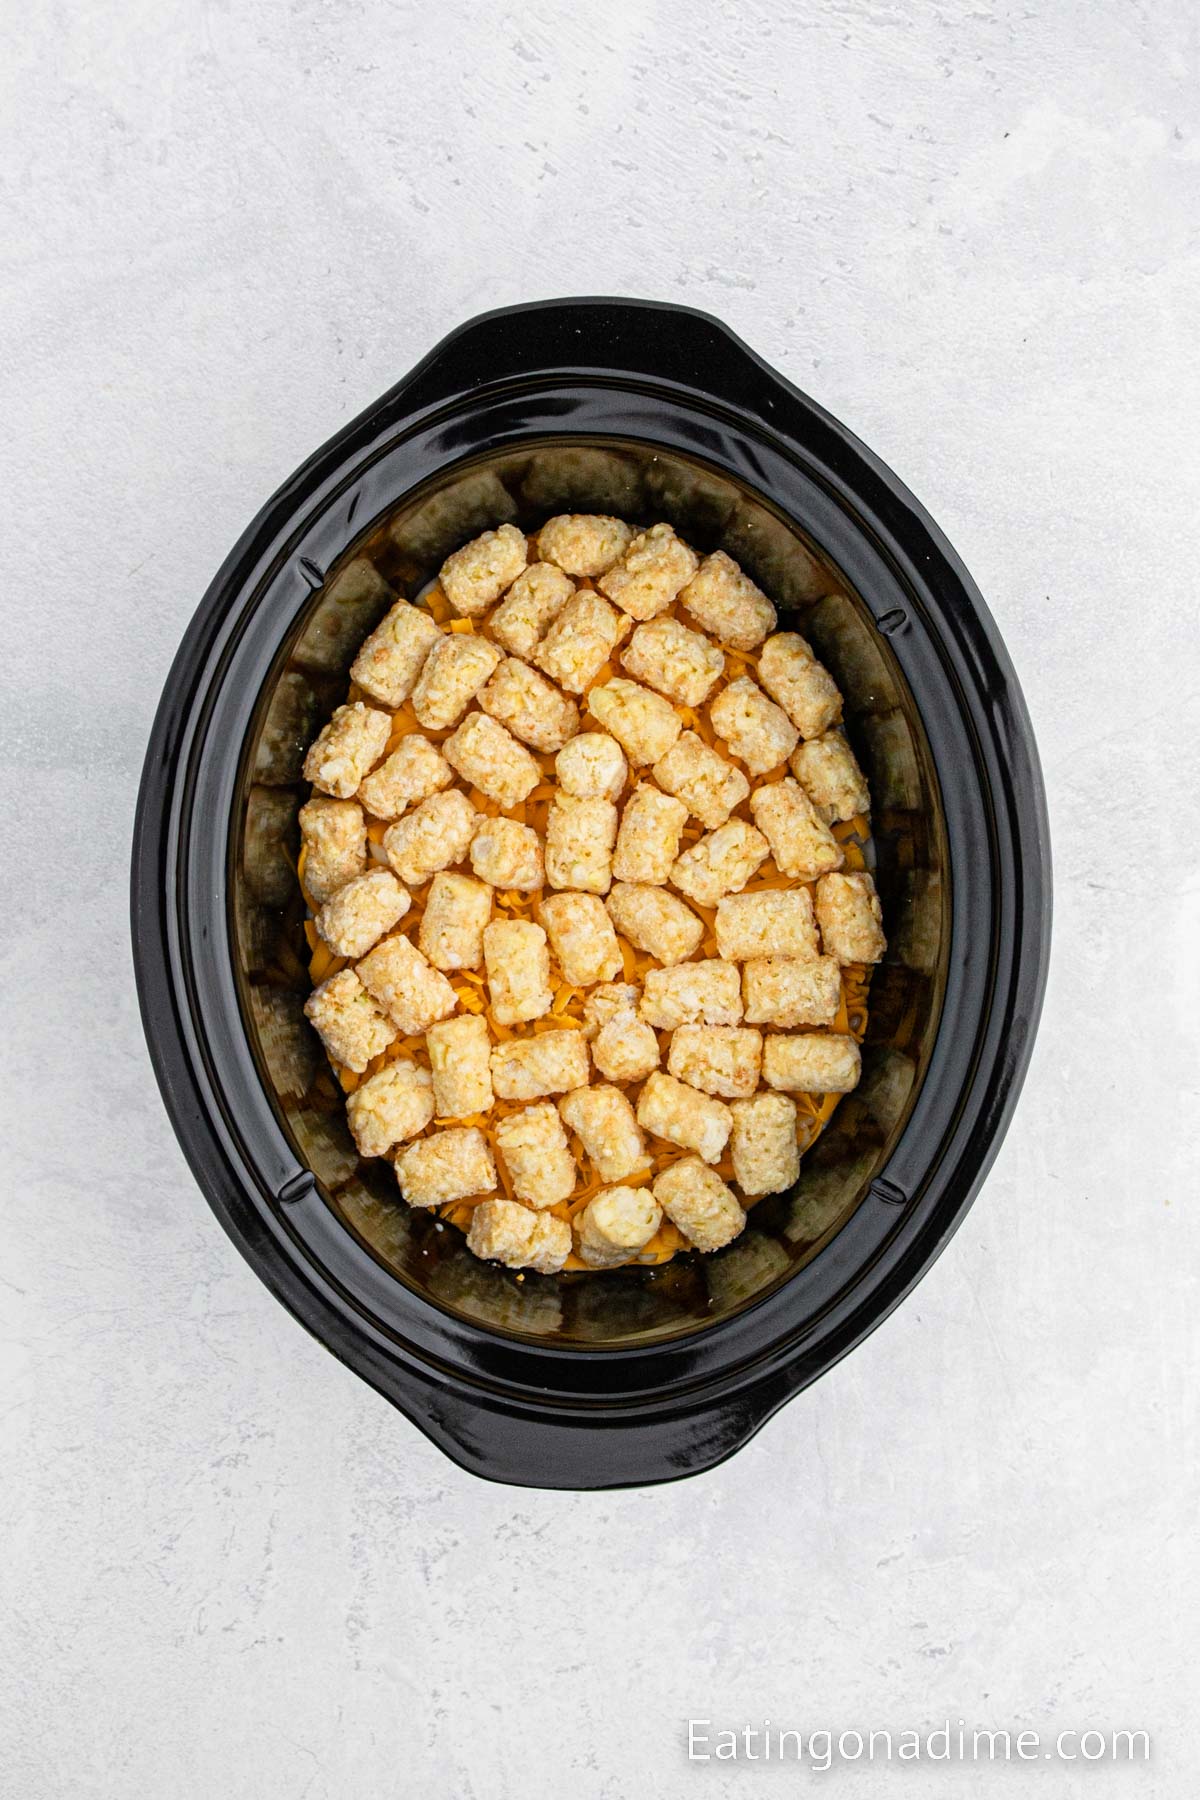 Layering tater tots in the slow cooker on a layer of cheese